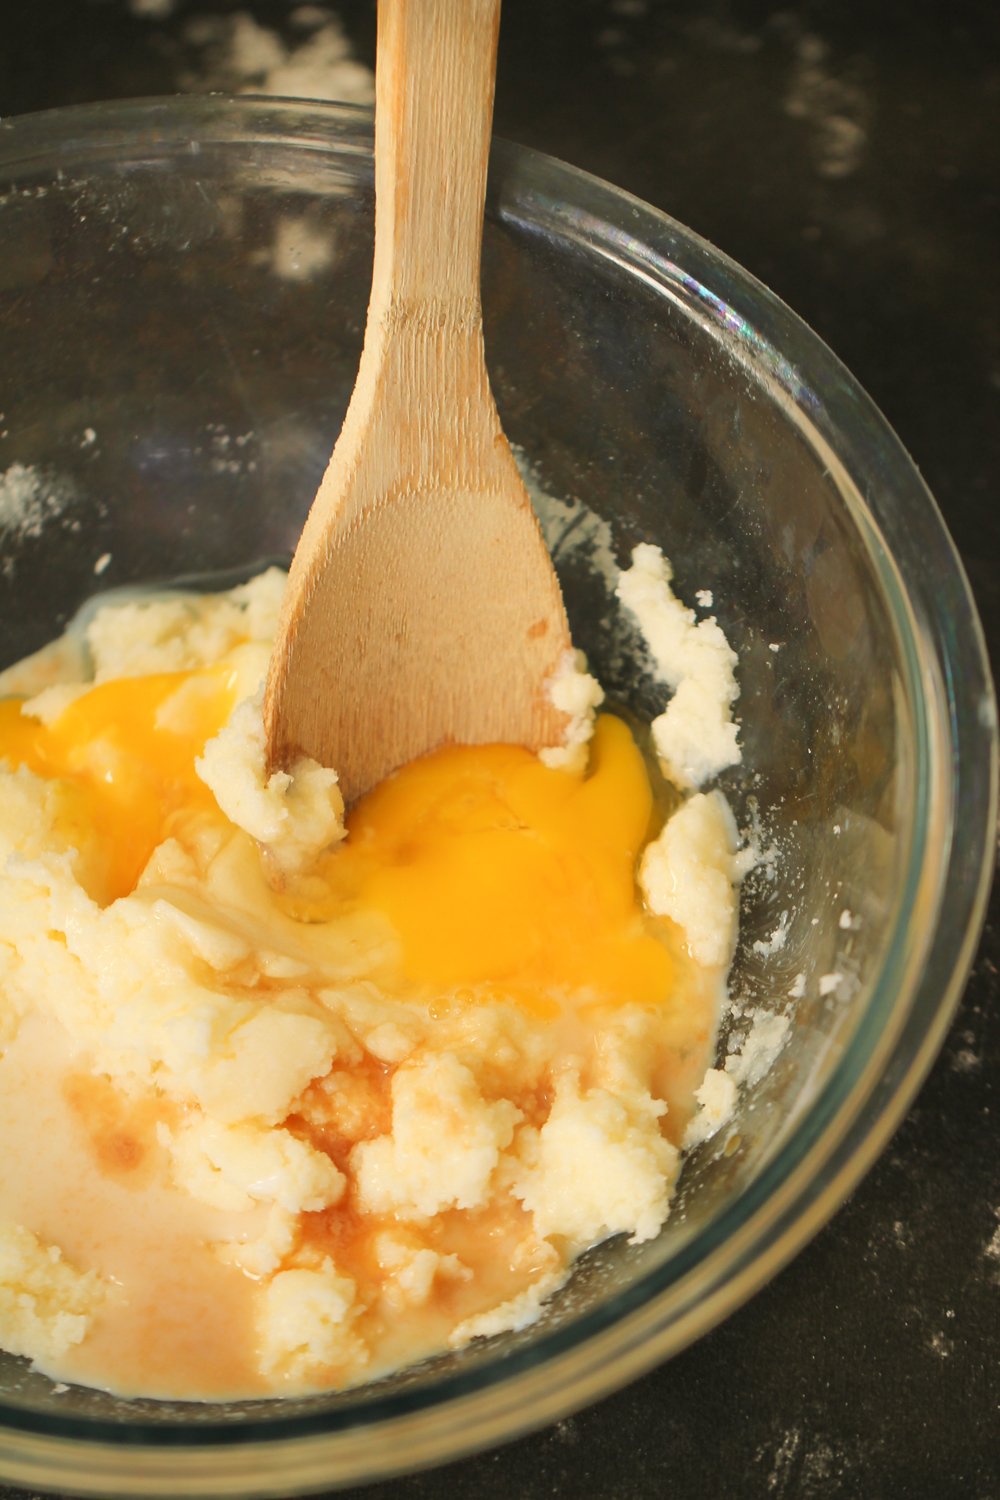 Eggs Added to Butter and Sugar